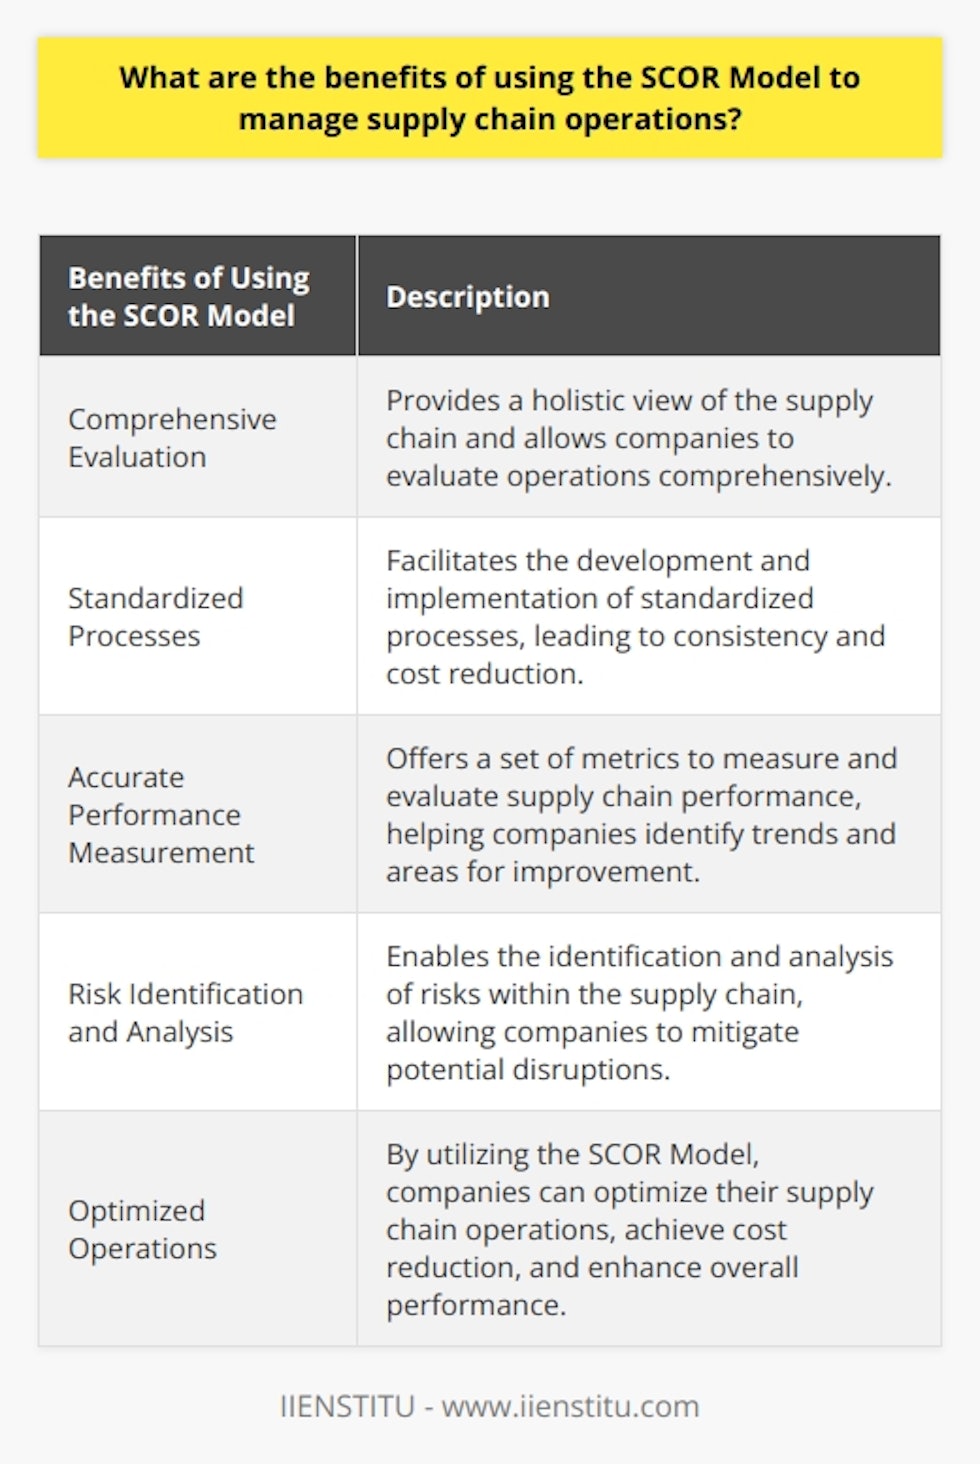 The SCOR Model (Supply Chain Operations Reference Model) is a valuable framework developed by the Supply Chain Council to optimize supply chain operations. By using this model, companies can benefit from a structured approach to supply chain management, develop standardized processes, measure performance, and identify and analyze risks. These benefits contribute to improved efficiency, cost reduction, and overall performance.One of the primary advantages of using the SCOR Model is that it provides a holistic view of the supply chain. It encompasses all the processes and components involved in the supply chain, allowing companies to evaluate their operations comprehensively. This comprehensive evaluation helps identify areas that require improvement. By understanding the entire supply chain, companies can make strategic decisions and implement changes that will optimize their operations.A significant benefit of the SCOR Model is that it facilitates the development and implementation of standardized processes. Consistency is crucial in supply chain operations to ensure efficiency and effectiveness. The SCOR Model offers a framework for standardizing strategies, enabling companies to replicate processes across the entire supply chain. This consistency leads to cost reduction, as procedures become streamlined and unnecessary complexities are eliminated.Furthermore, the SCOR Model provides a set of metrics that allow companies to measure and evaluate supply chain performance accurately. These metrics include important factors such as supply chain cycle time, order fulfillment time, and inventory turnover. By tracking these metrics over time, companies can identify performance trends and areas that need improvement. This data-driven approach helps businesses make informed decisions and enhance their overall supply chain performance.Another valuable benefit of using the SCOR Model is its ability to identify and analyze risks within the supply chain. Risk management is crucial for ensuring uninterrupted operations and customer satisfaction. The SCOR Model provides a framework to identify risks related to supplier reliability, delivery time, quality assurance, and other crucial factors. By understanding and mitigating these risks, companies can create resilient and efficient supply chains.In summary, the SCOR Model offers numerous benefits for companies managing supply chain operations. It provides a structured approach that enables a comprehensive view of the supply chain and identifies areas for improvement. The model also helps to develop standardized processes, measure performance, and mitigate risks. By utilizing the SCOR Model, businesses can optimize their supply chain operations, achieve cost reduction, and enhance overall performance.